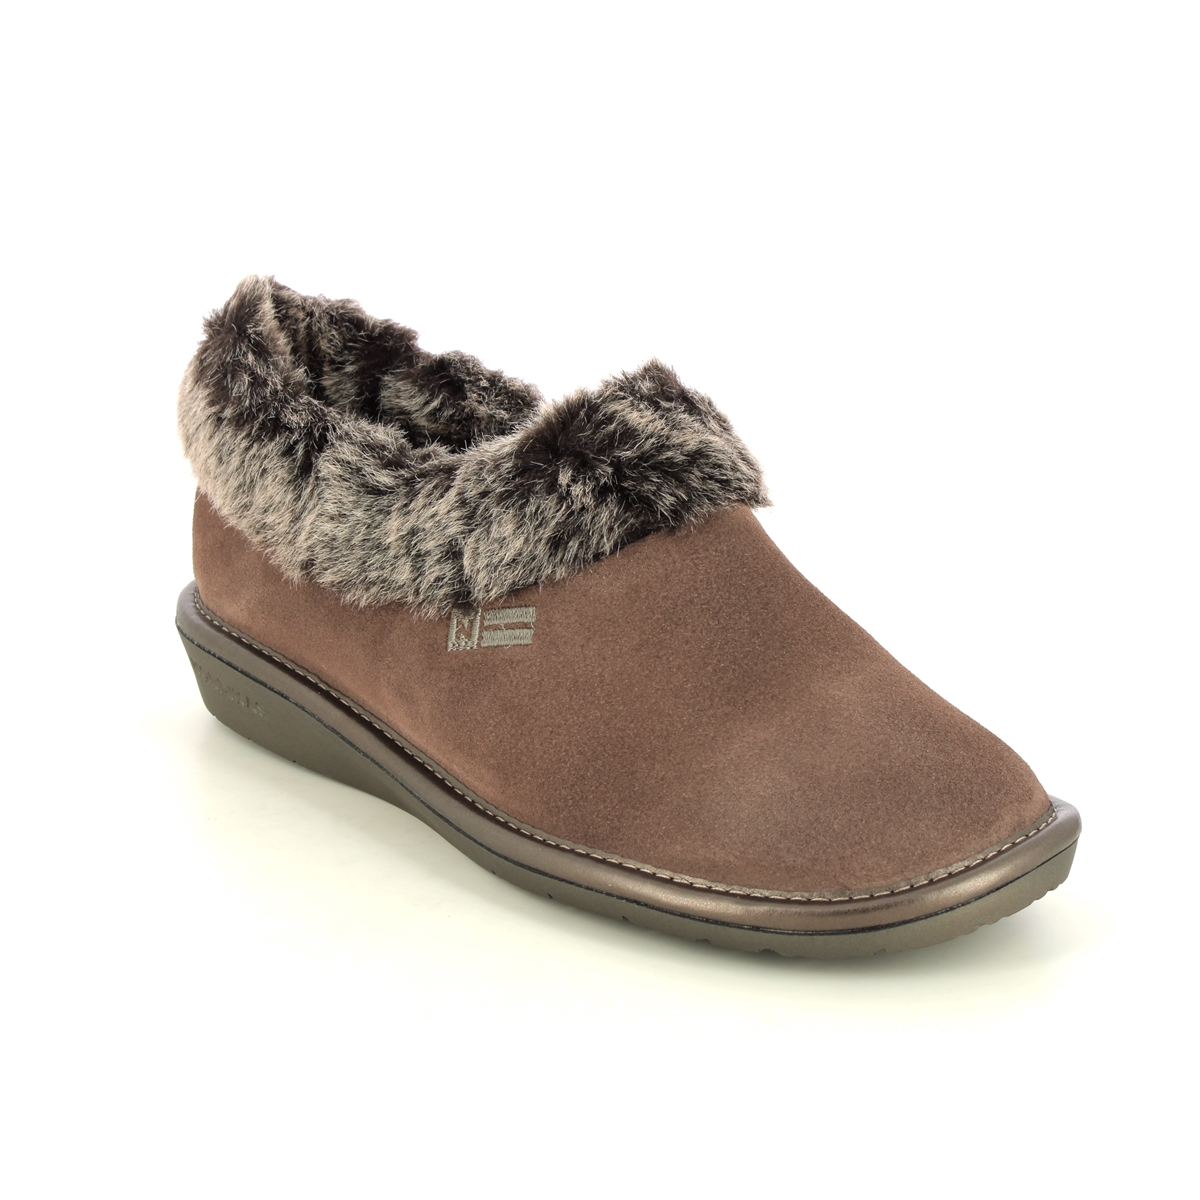 Nordikas Toasty Fur Taupe Suede Womens Slippers 1358-53 In Size 36 In Plain Taupe Suede